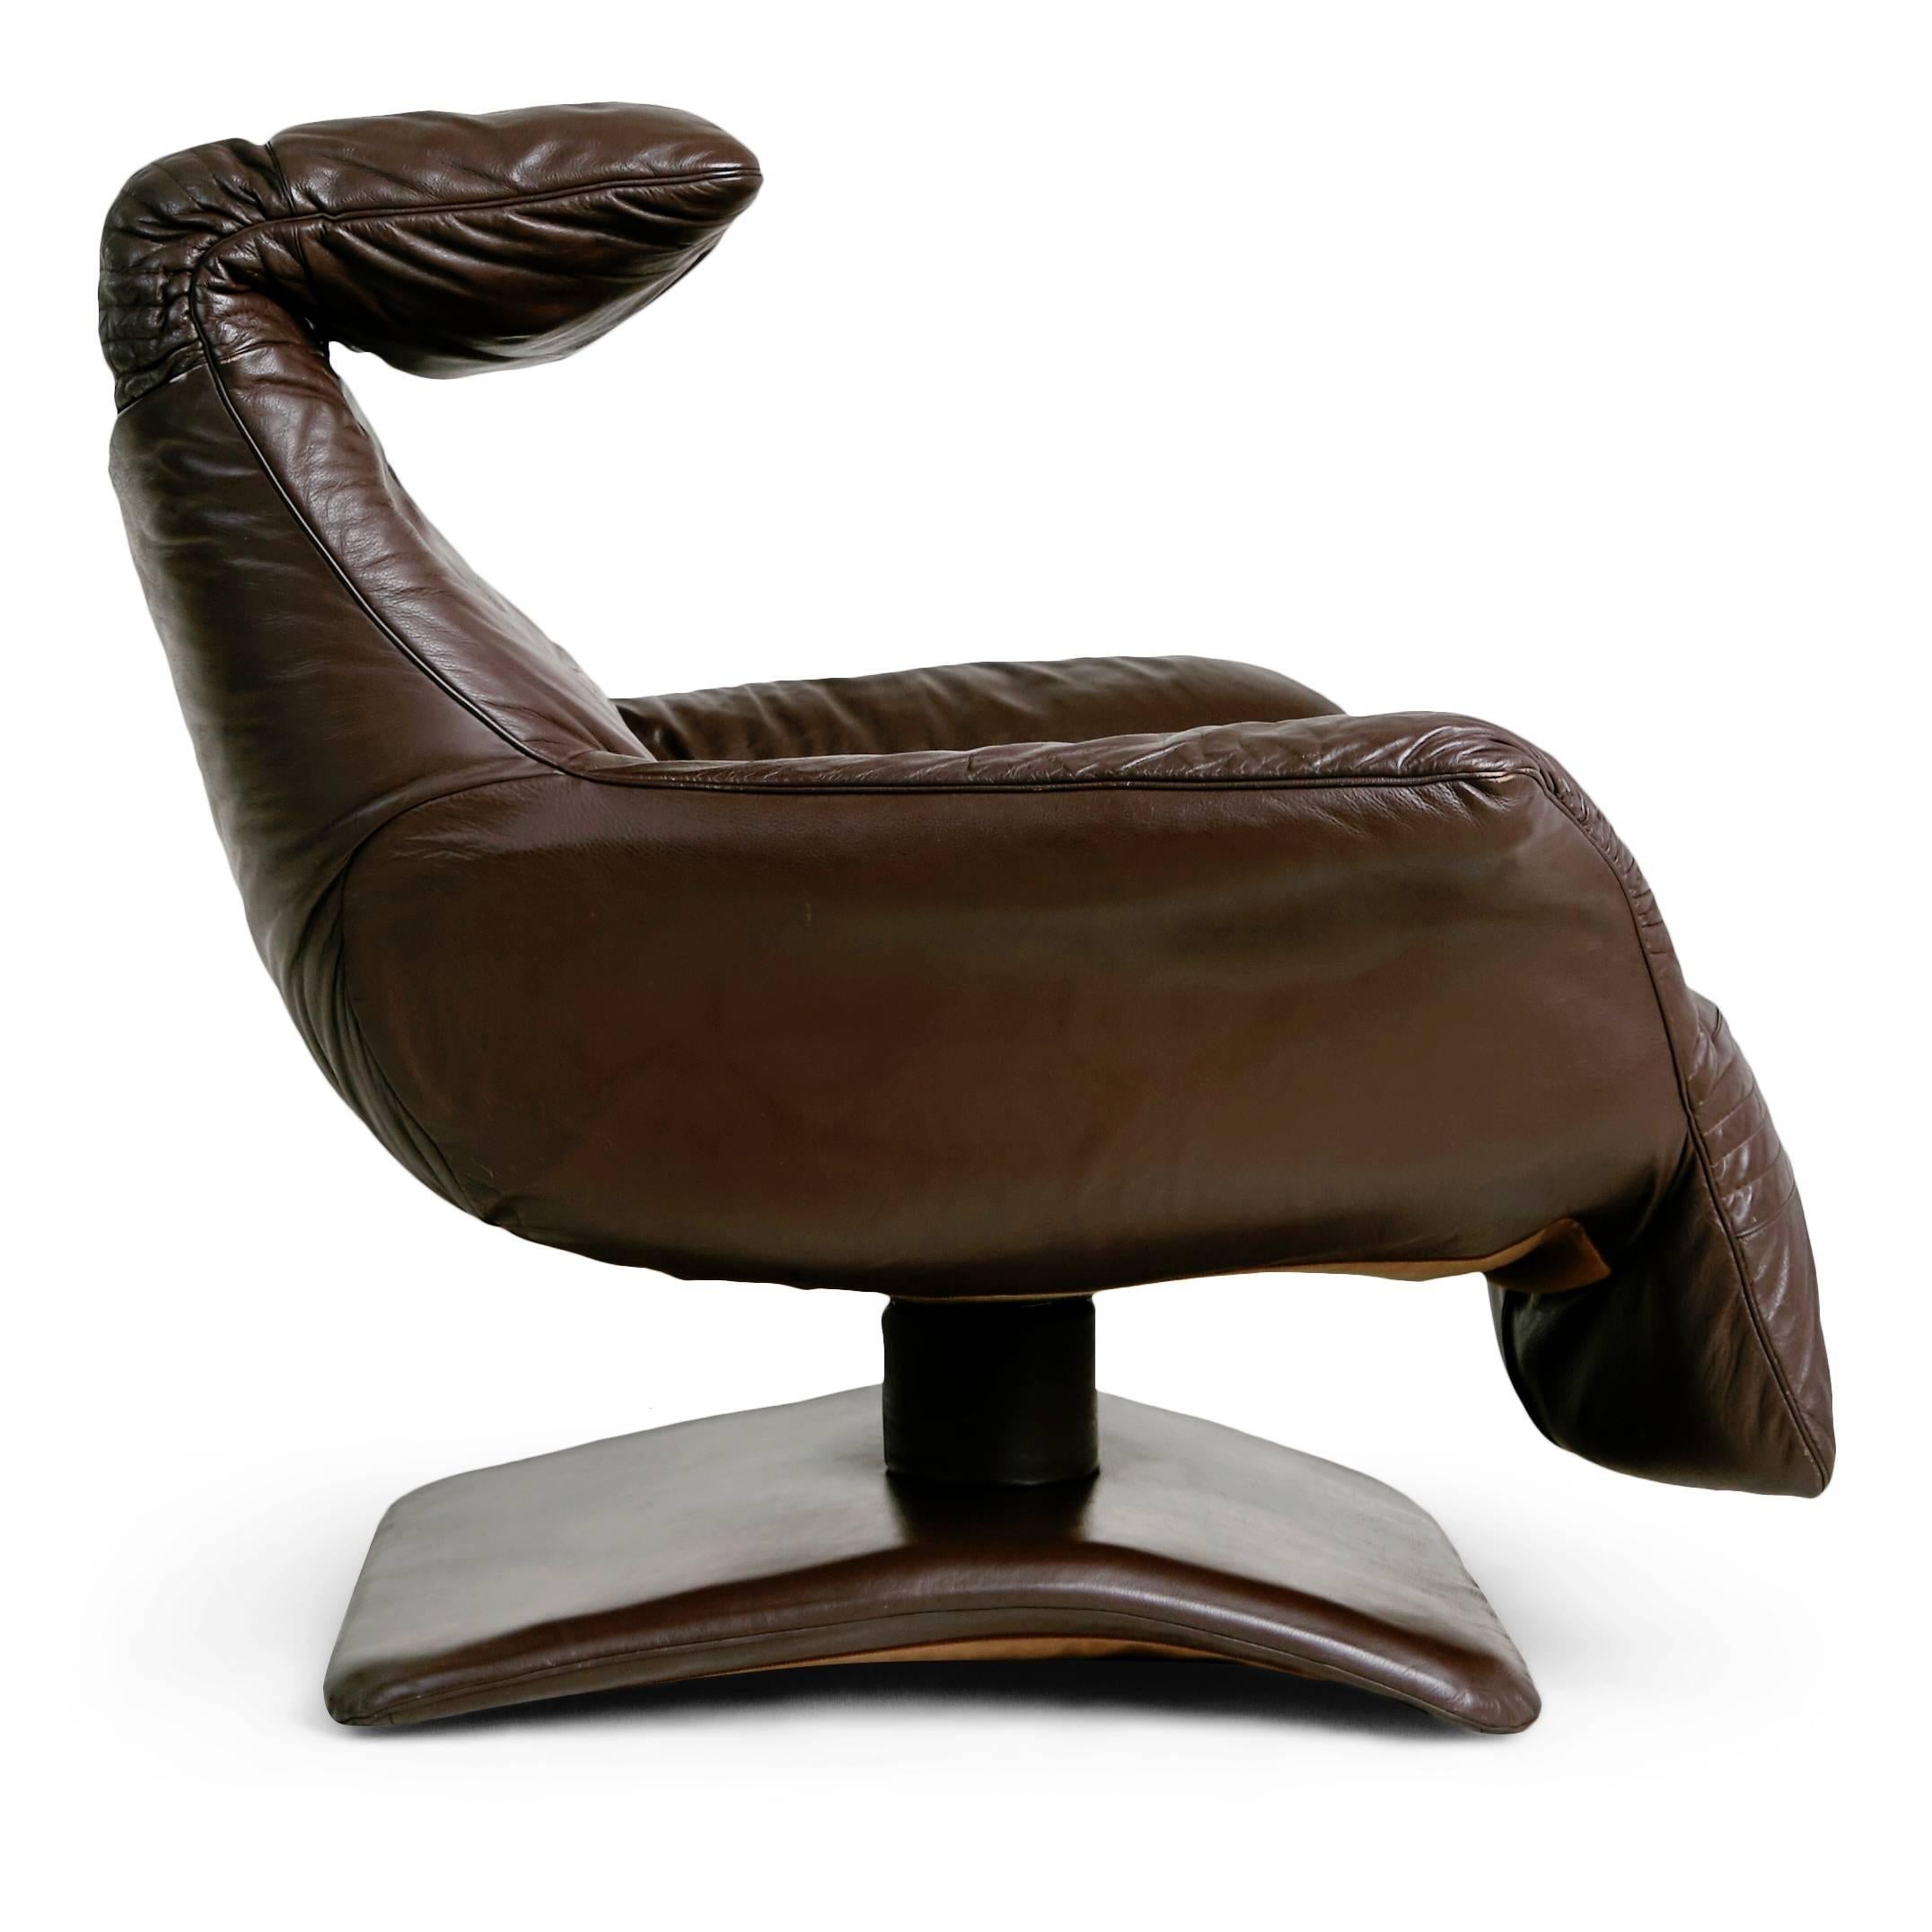 Late 20th Century Scandinavian Modern Leather Club Chairs with Adjustable Headrests, Pair